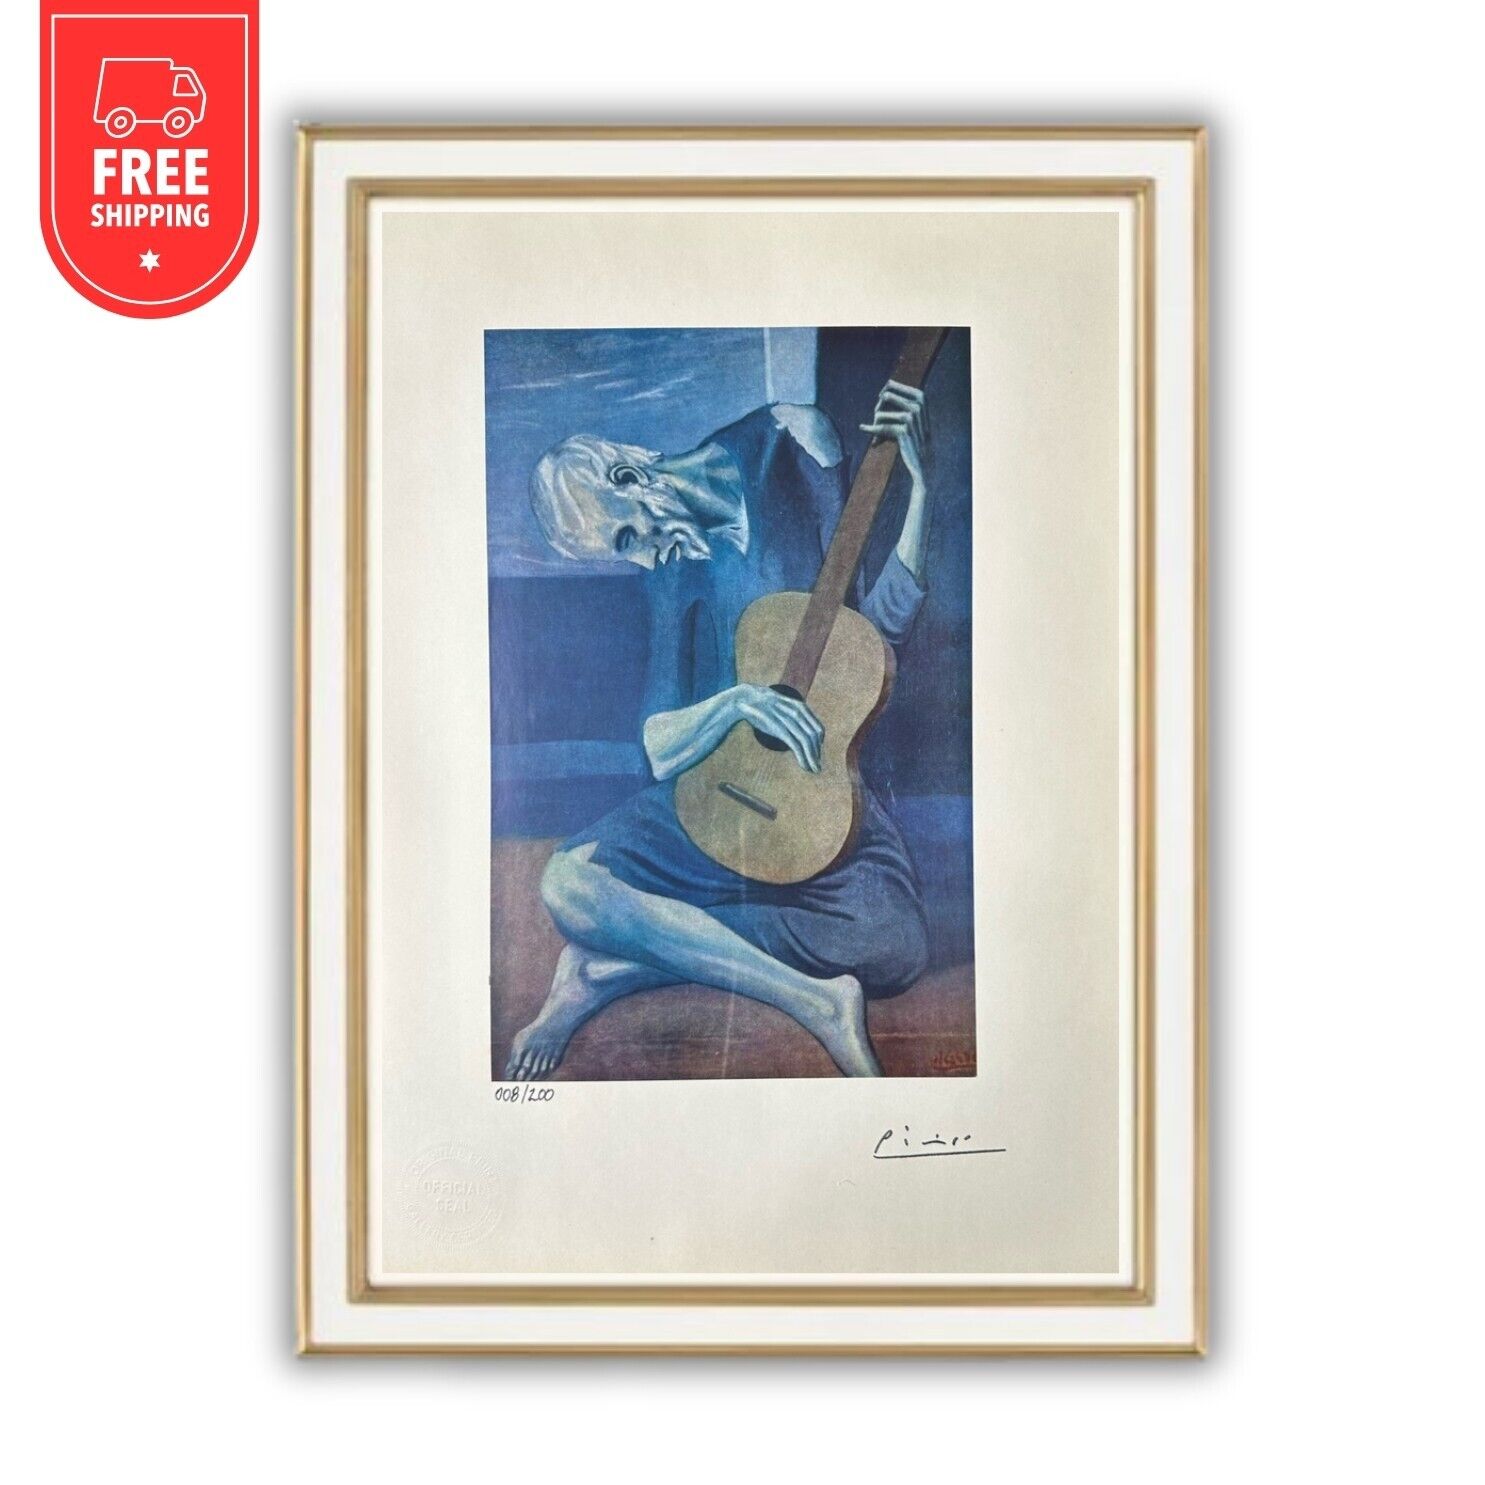 Pablo Picasso Original Print, Old Guitarrist 1903 - Signed Hand Tipped Print